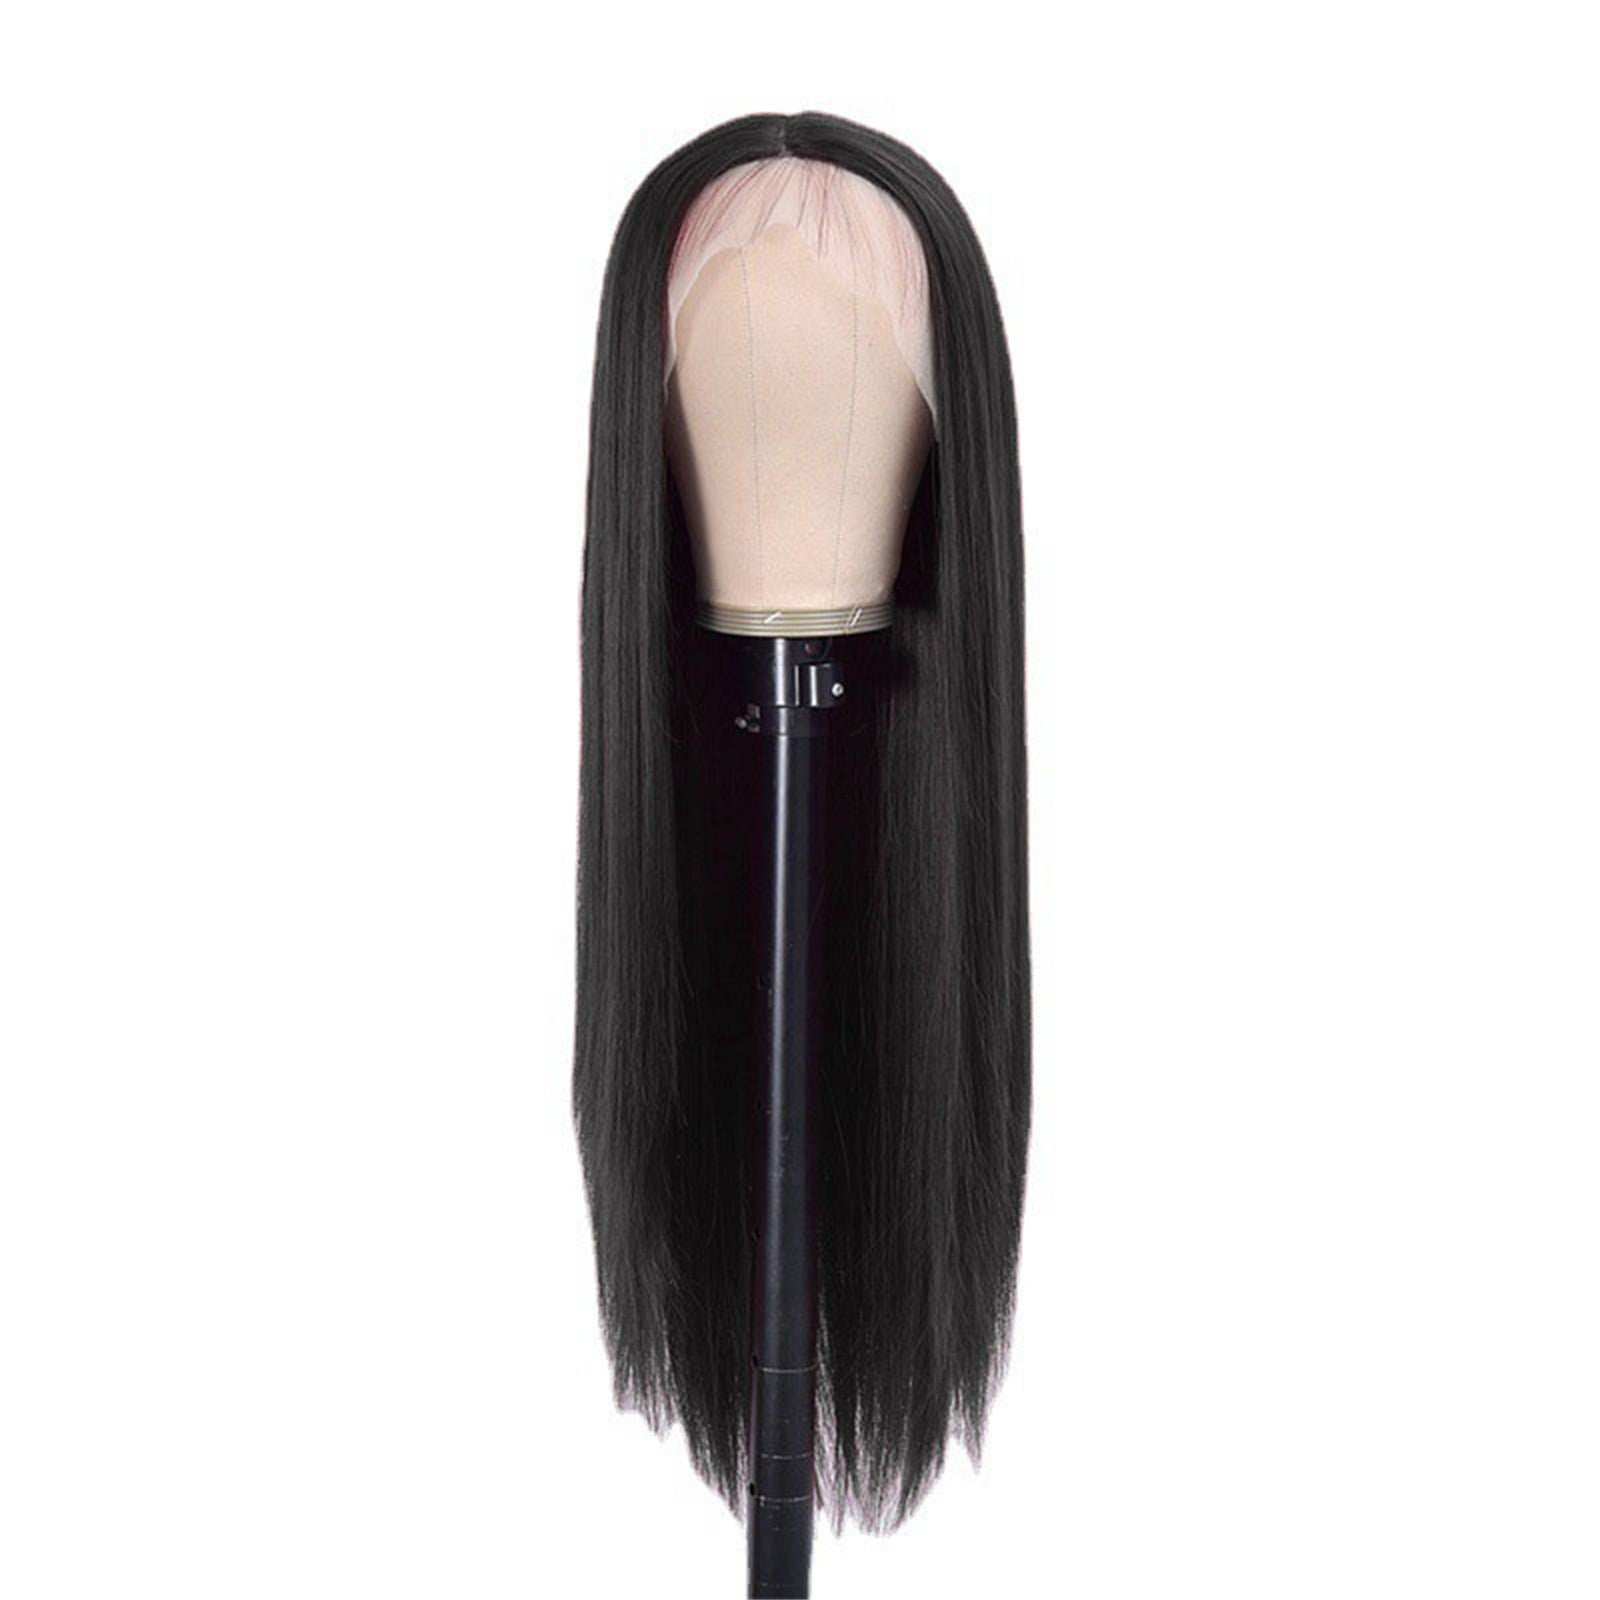 Kalisa Dark Gray Wig Long Straight Glurless Wig Synthetic Gray Lace Front  Wig Heat Resistant Fiber Cosplay Makeup Wigs for Women